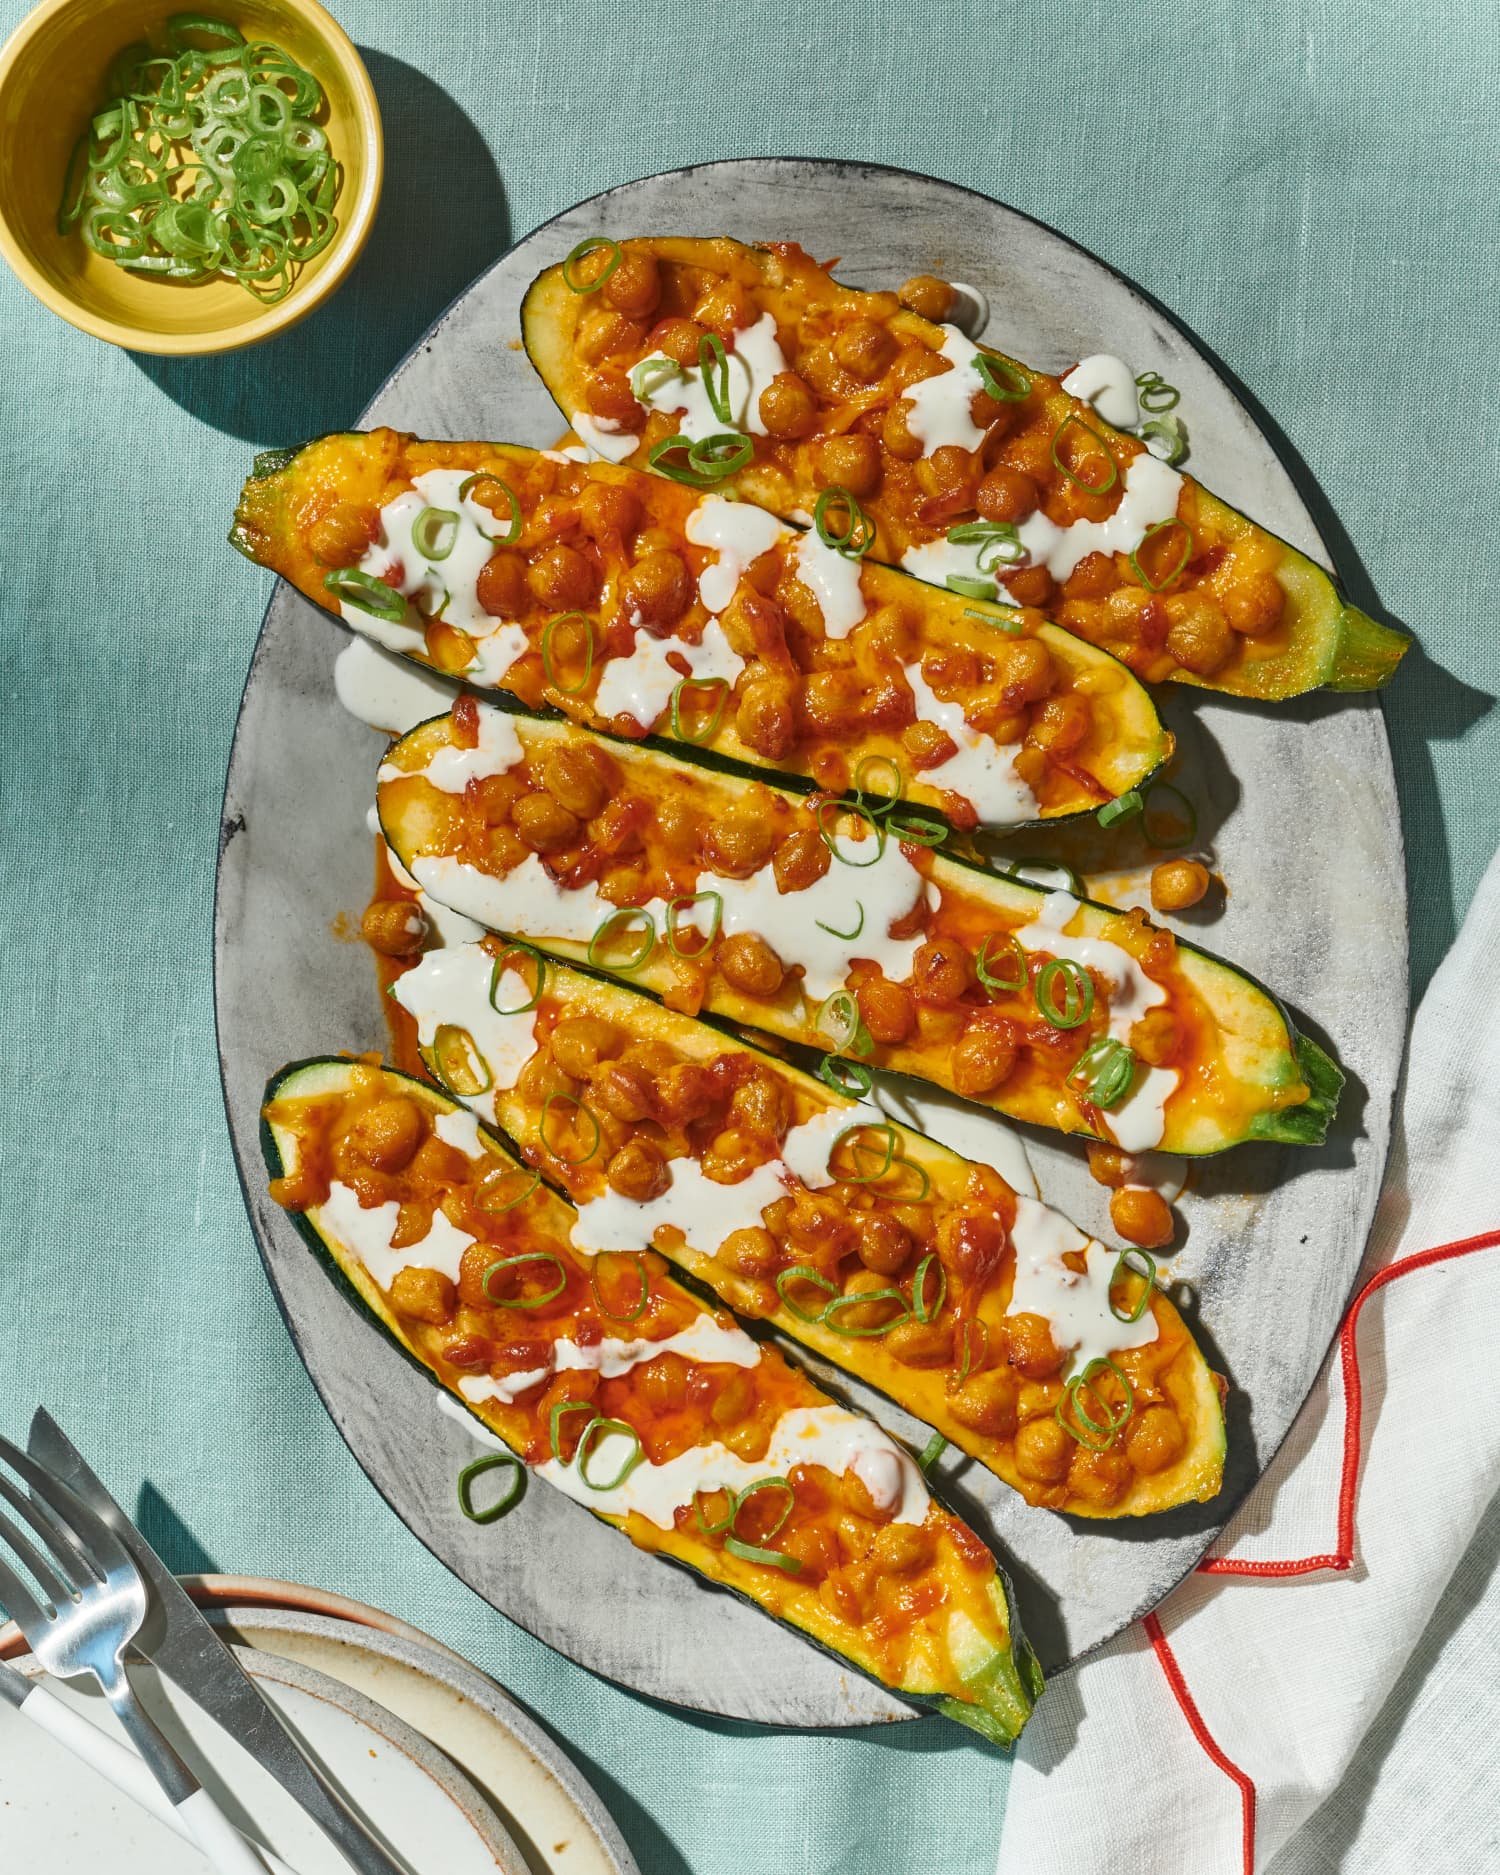 Spice Up Your Summer with Buffalo Chickpea Zucchini Boats